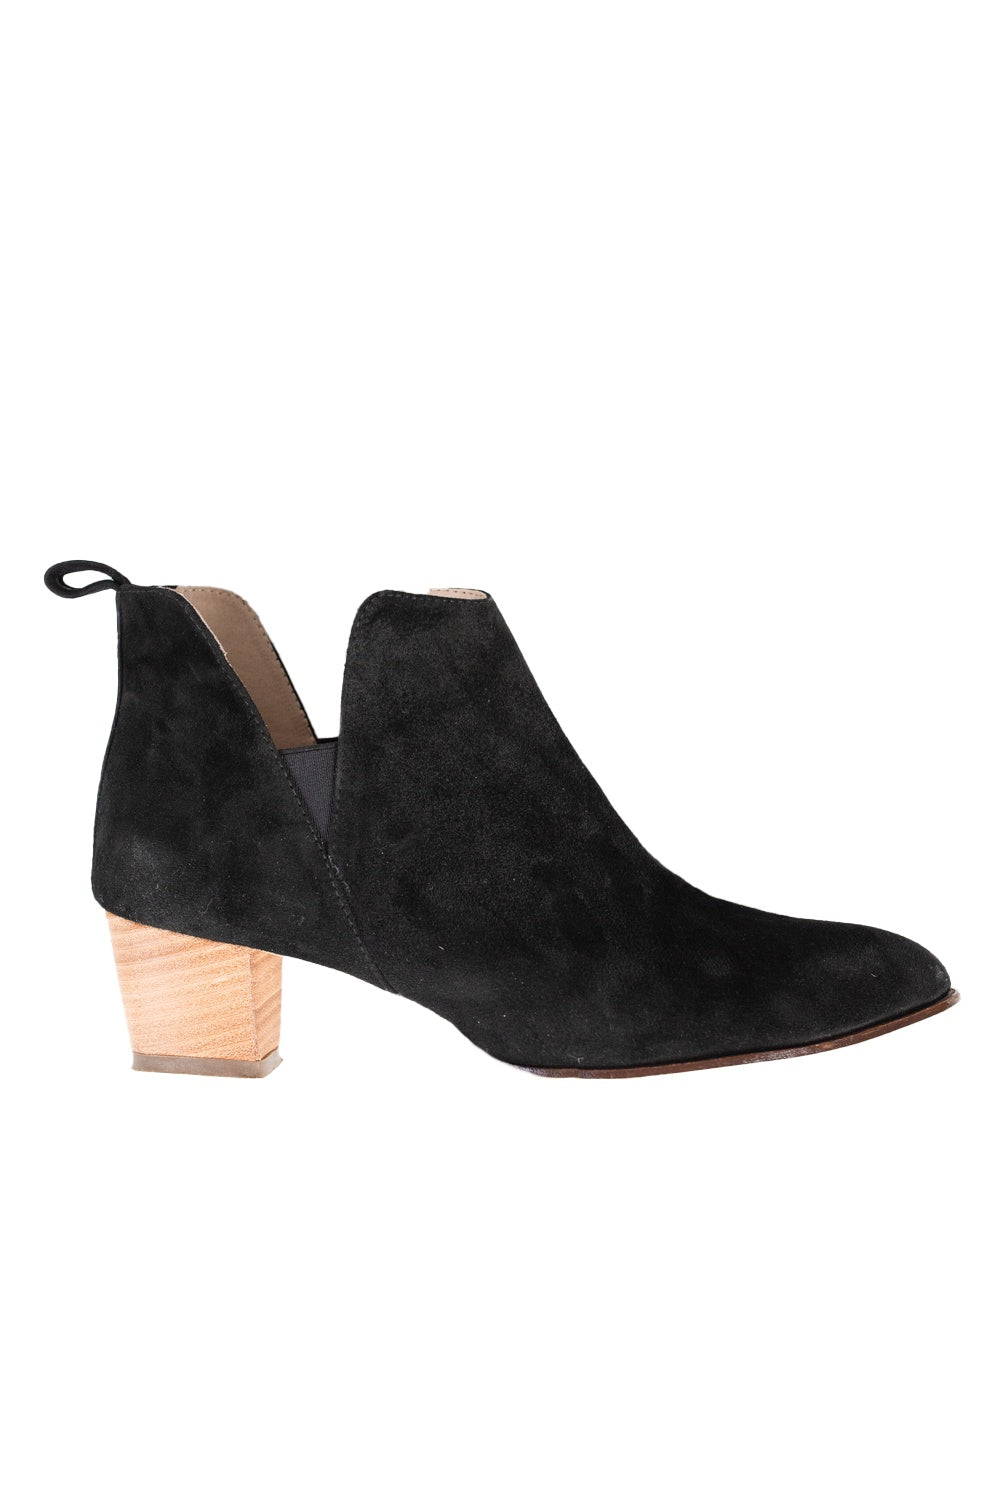 Raven Suede Boots in Black Shoes